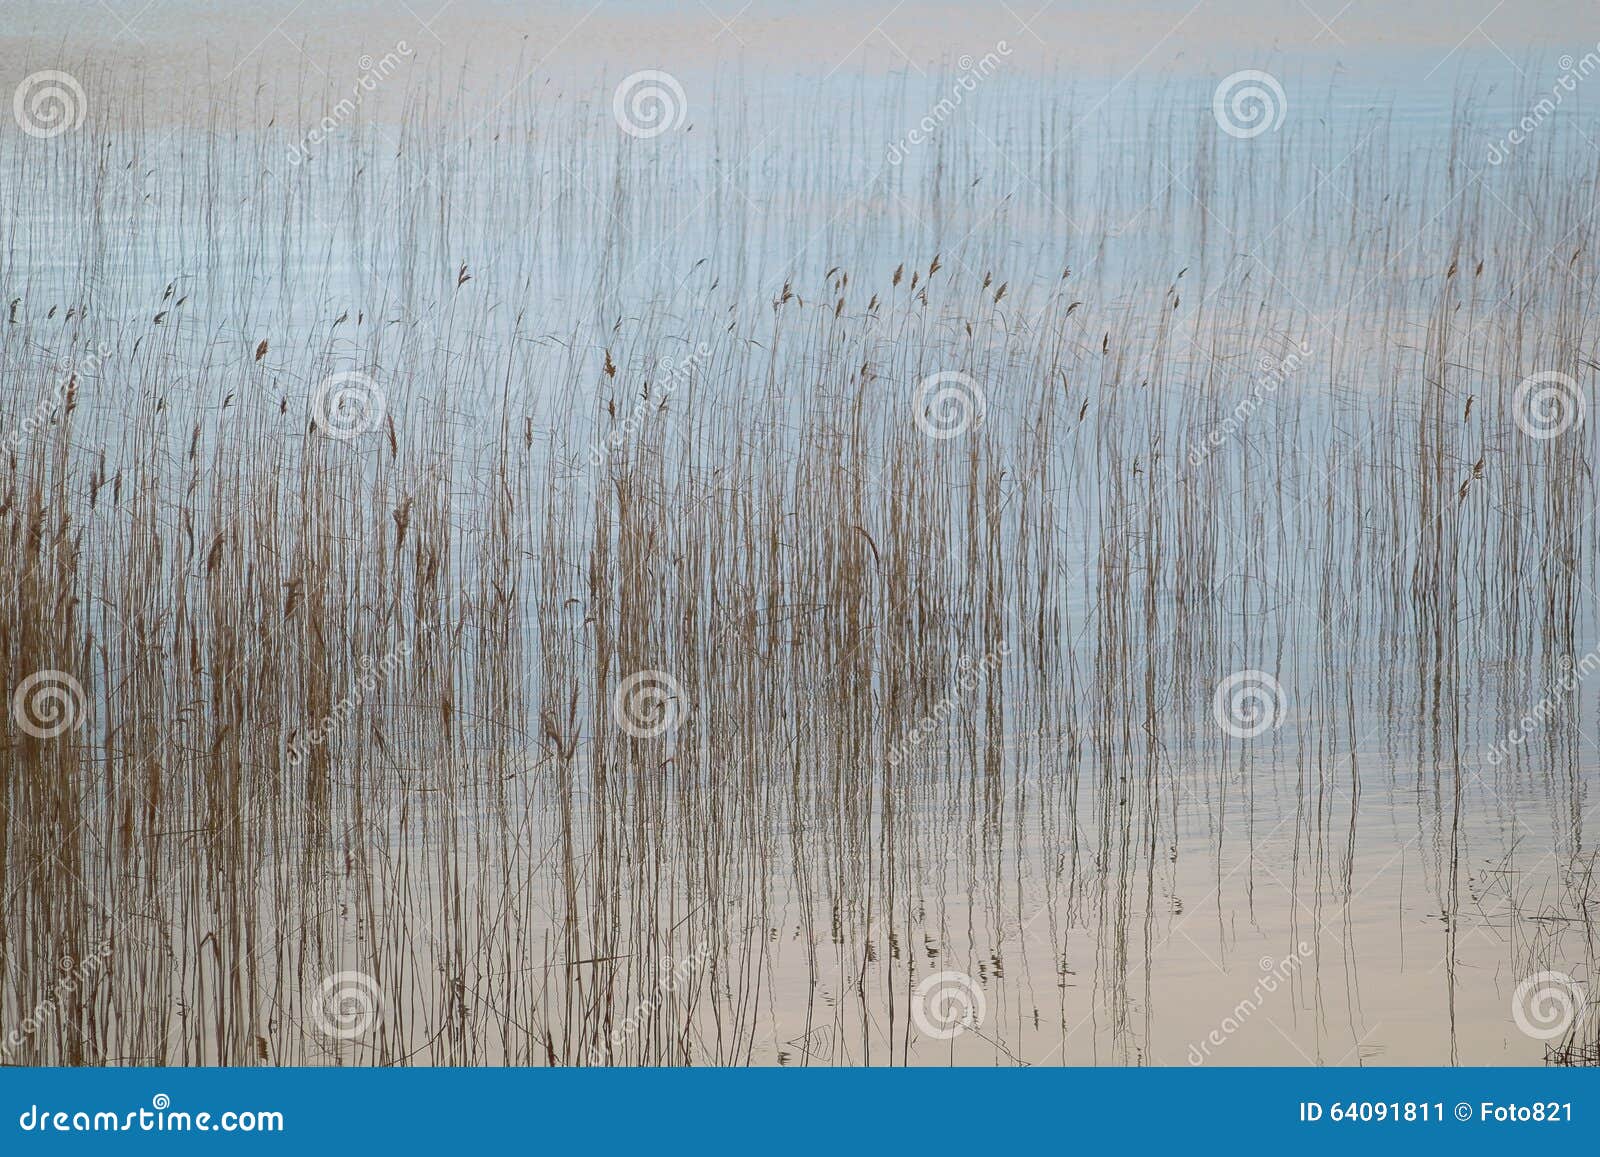 water and reeds